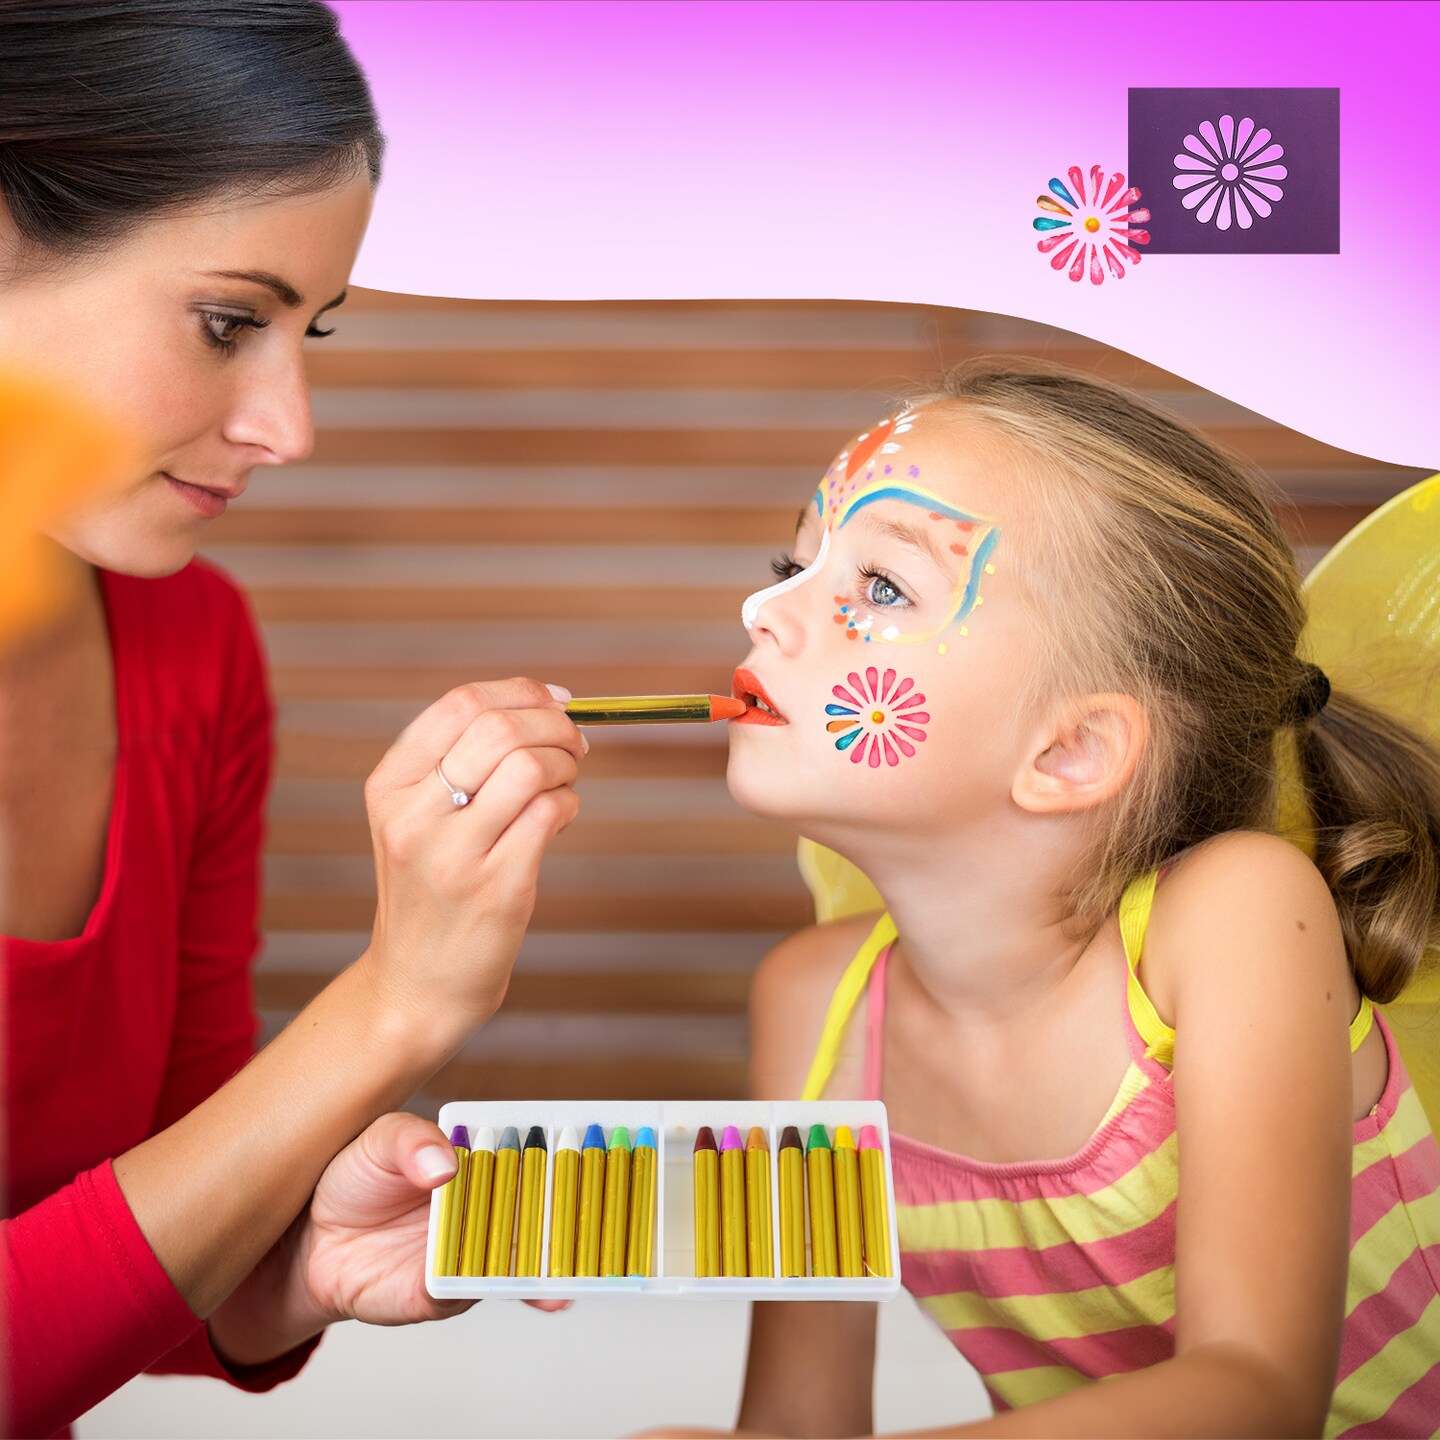 Face Painting Kit for Kids, 16 Face Paint Crayons with 50 Face Painting Stencils by Glokers